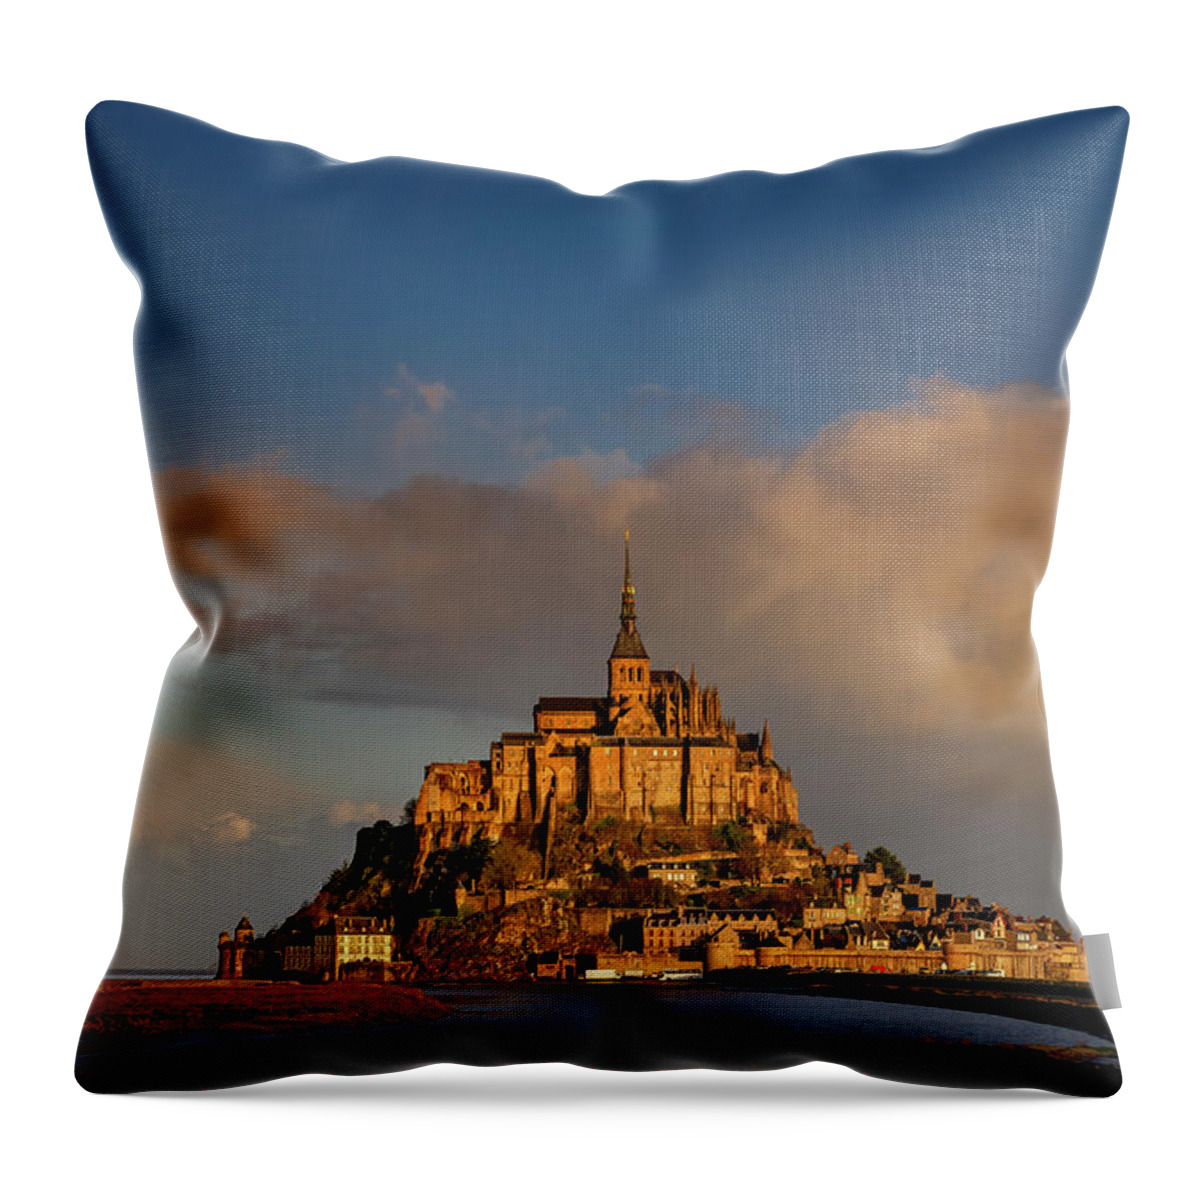 Mont-saint-michel Throw Pillow featuring the photograph Mont Saint Michel - Saint Michael's Mount by Olivier Parent